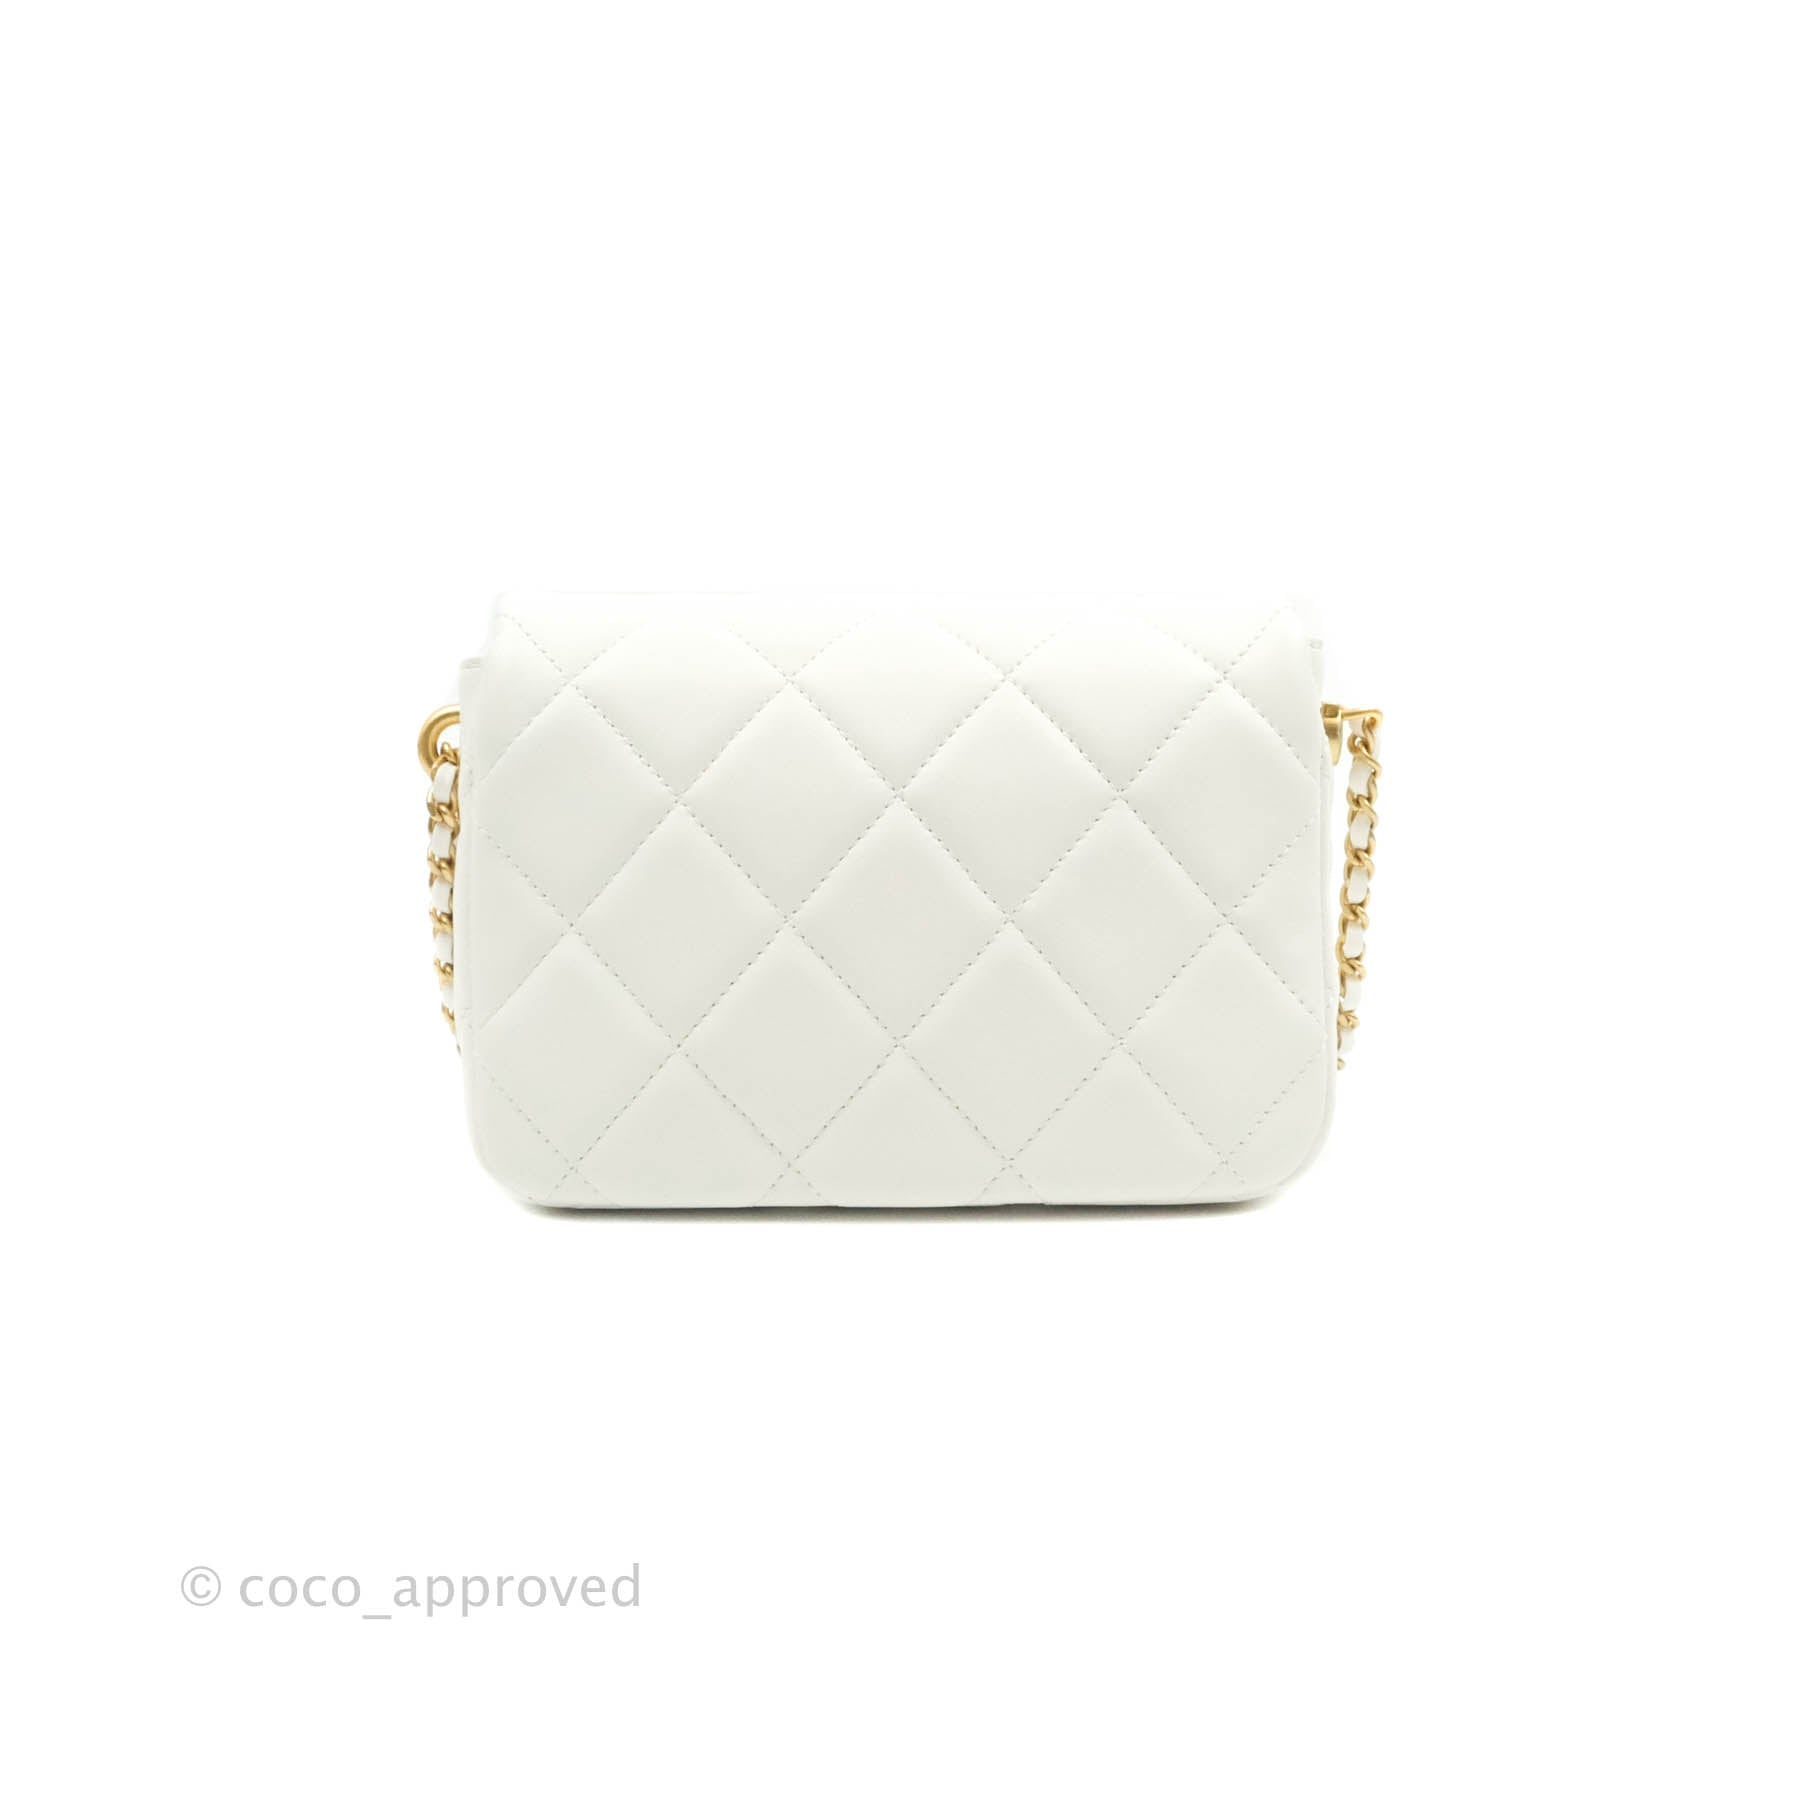 CHANEL Lambskin Quilted Pearl Mini About Pearls Drawstring Bag White 774396